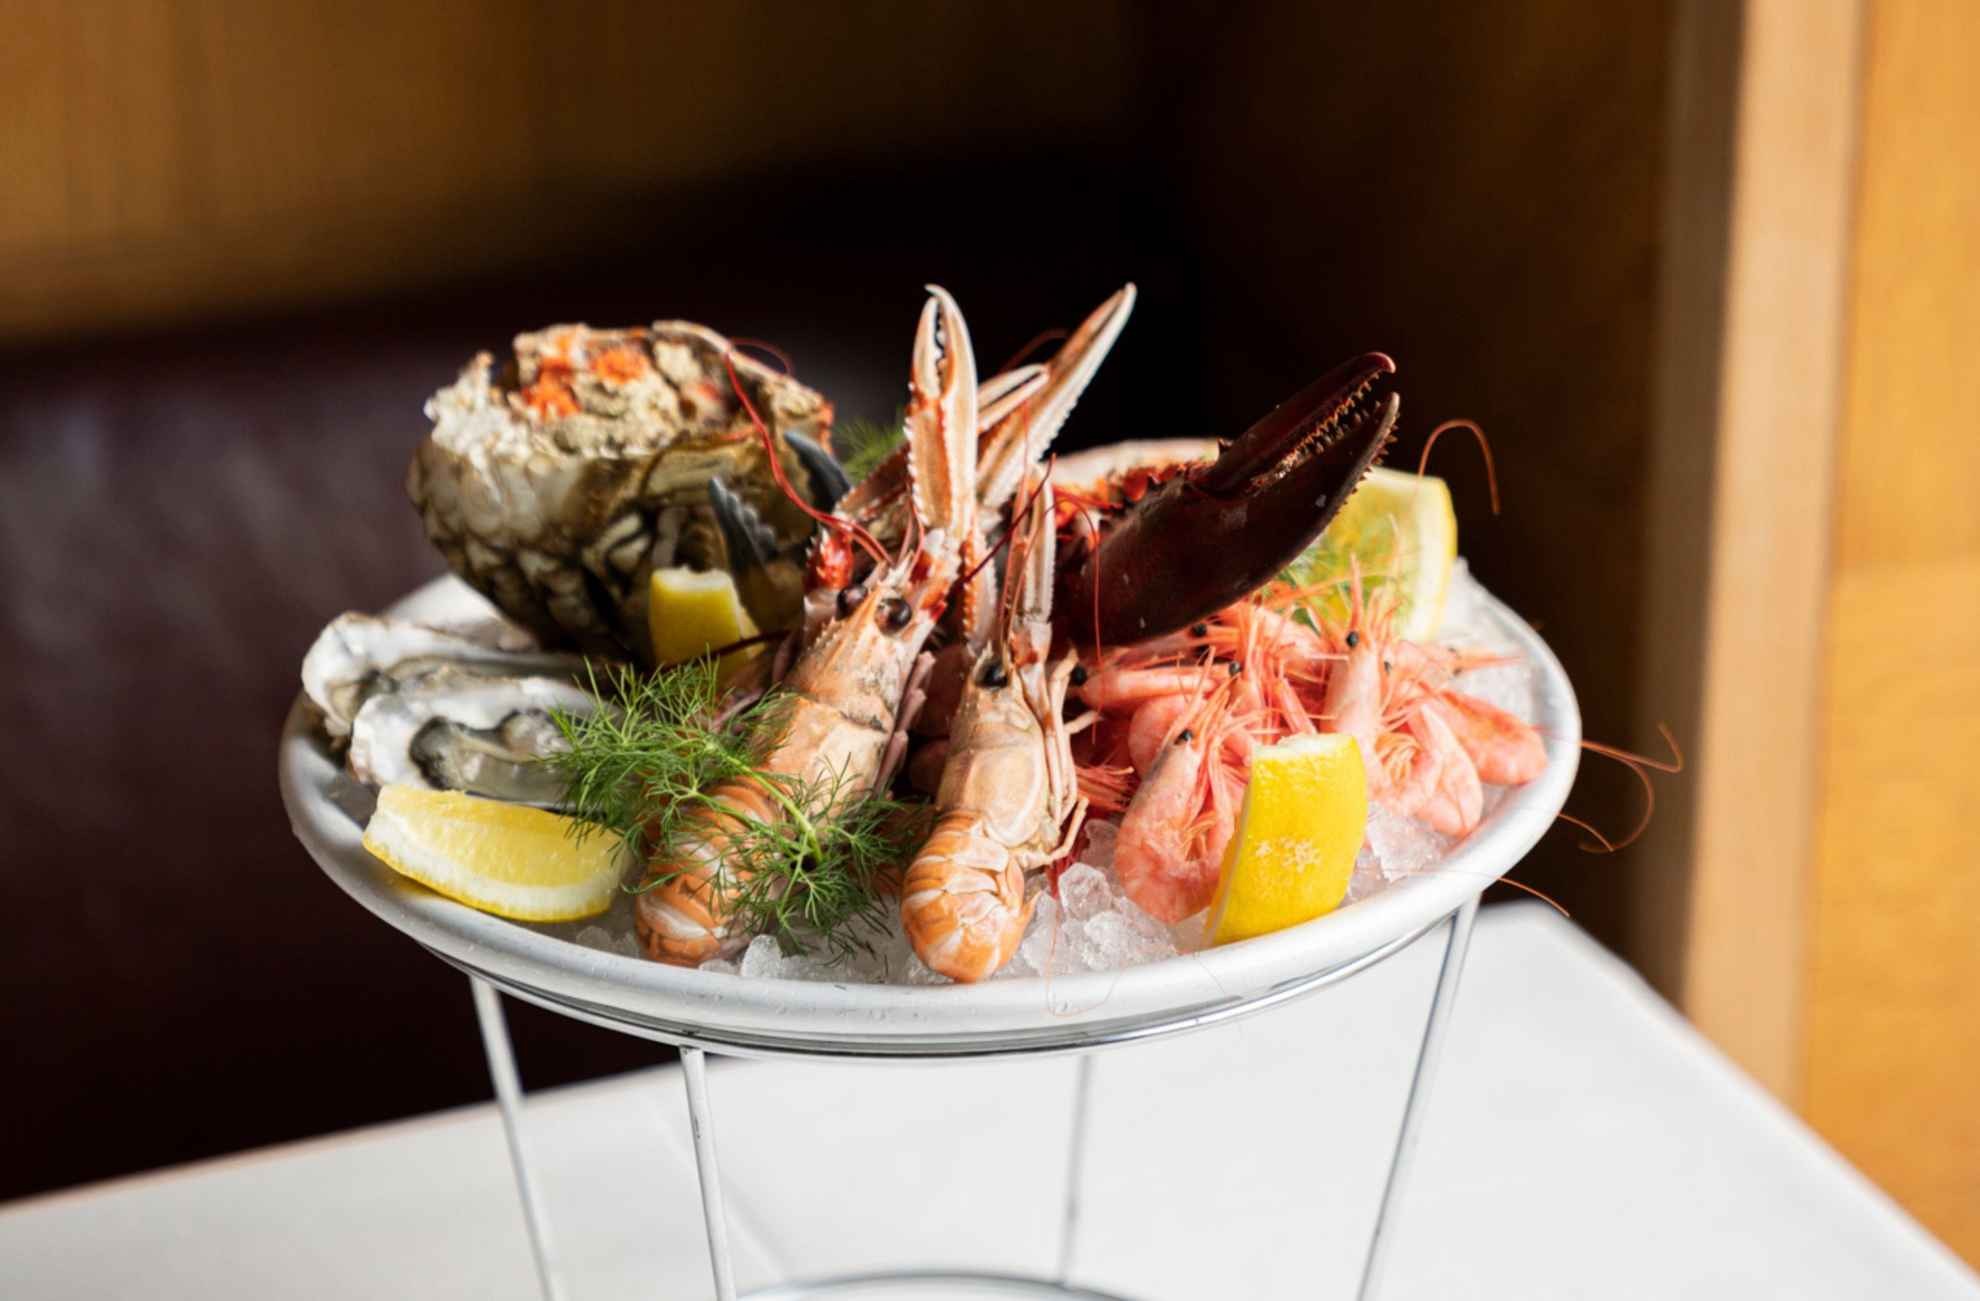 Fresh crayfish, oysters, shrimp, crab, lemon, and dill on a seafood platter at restaurant Sturehof.